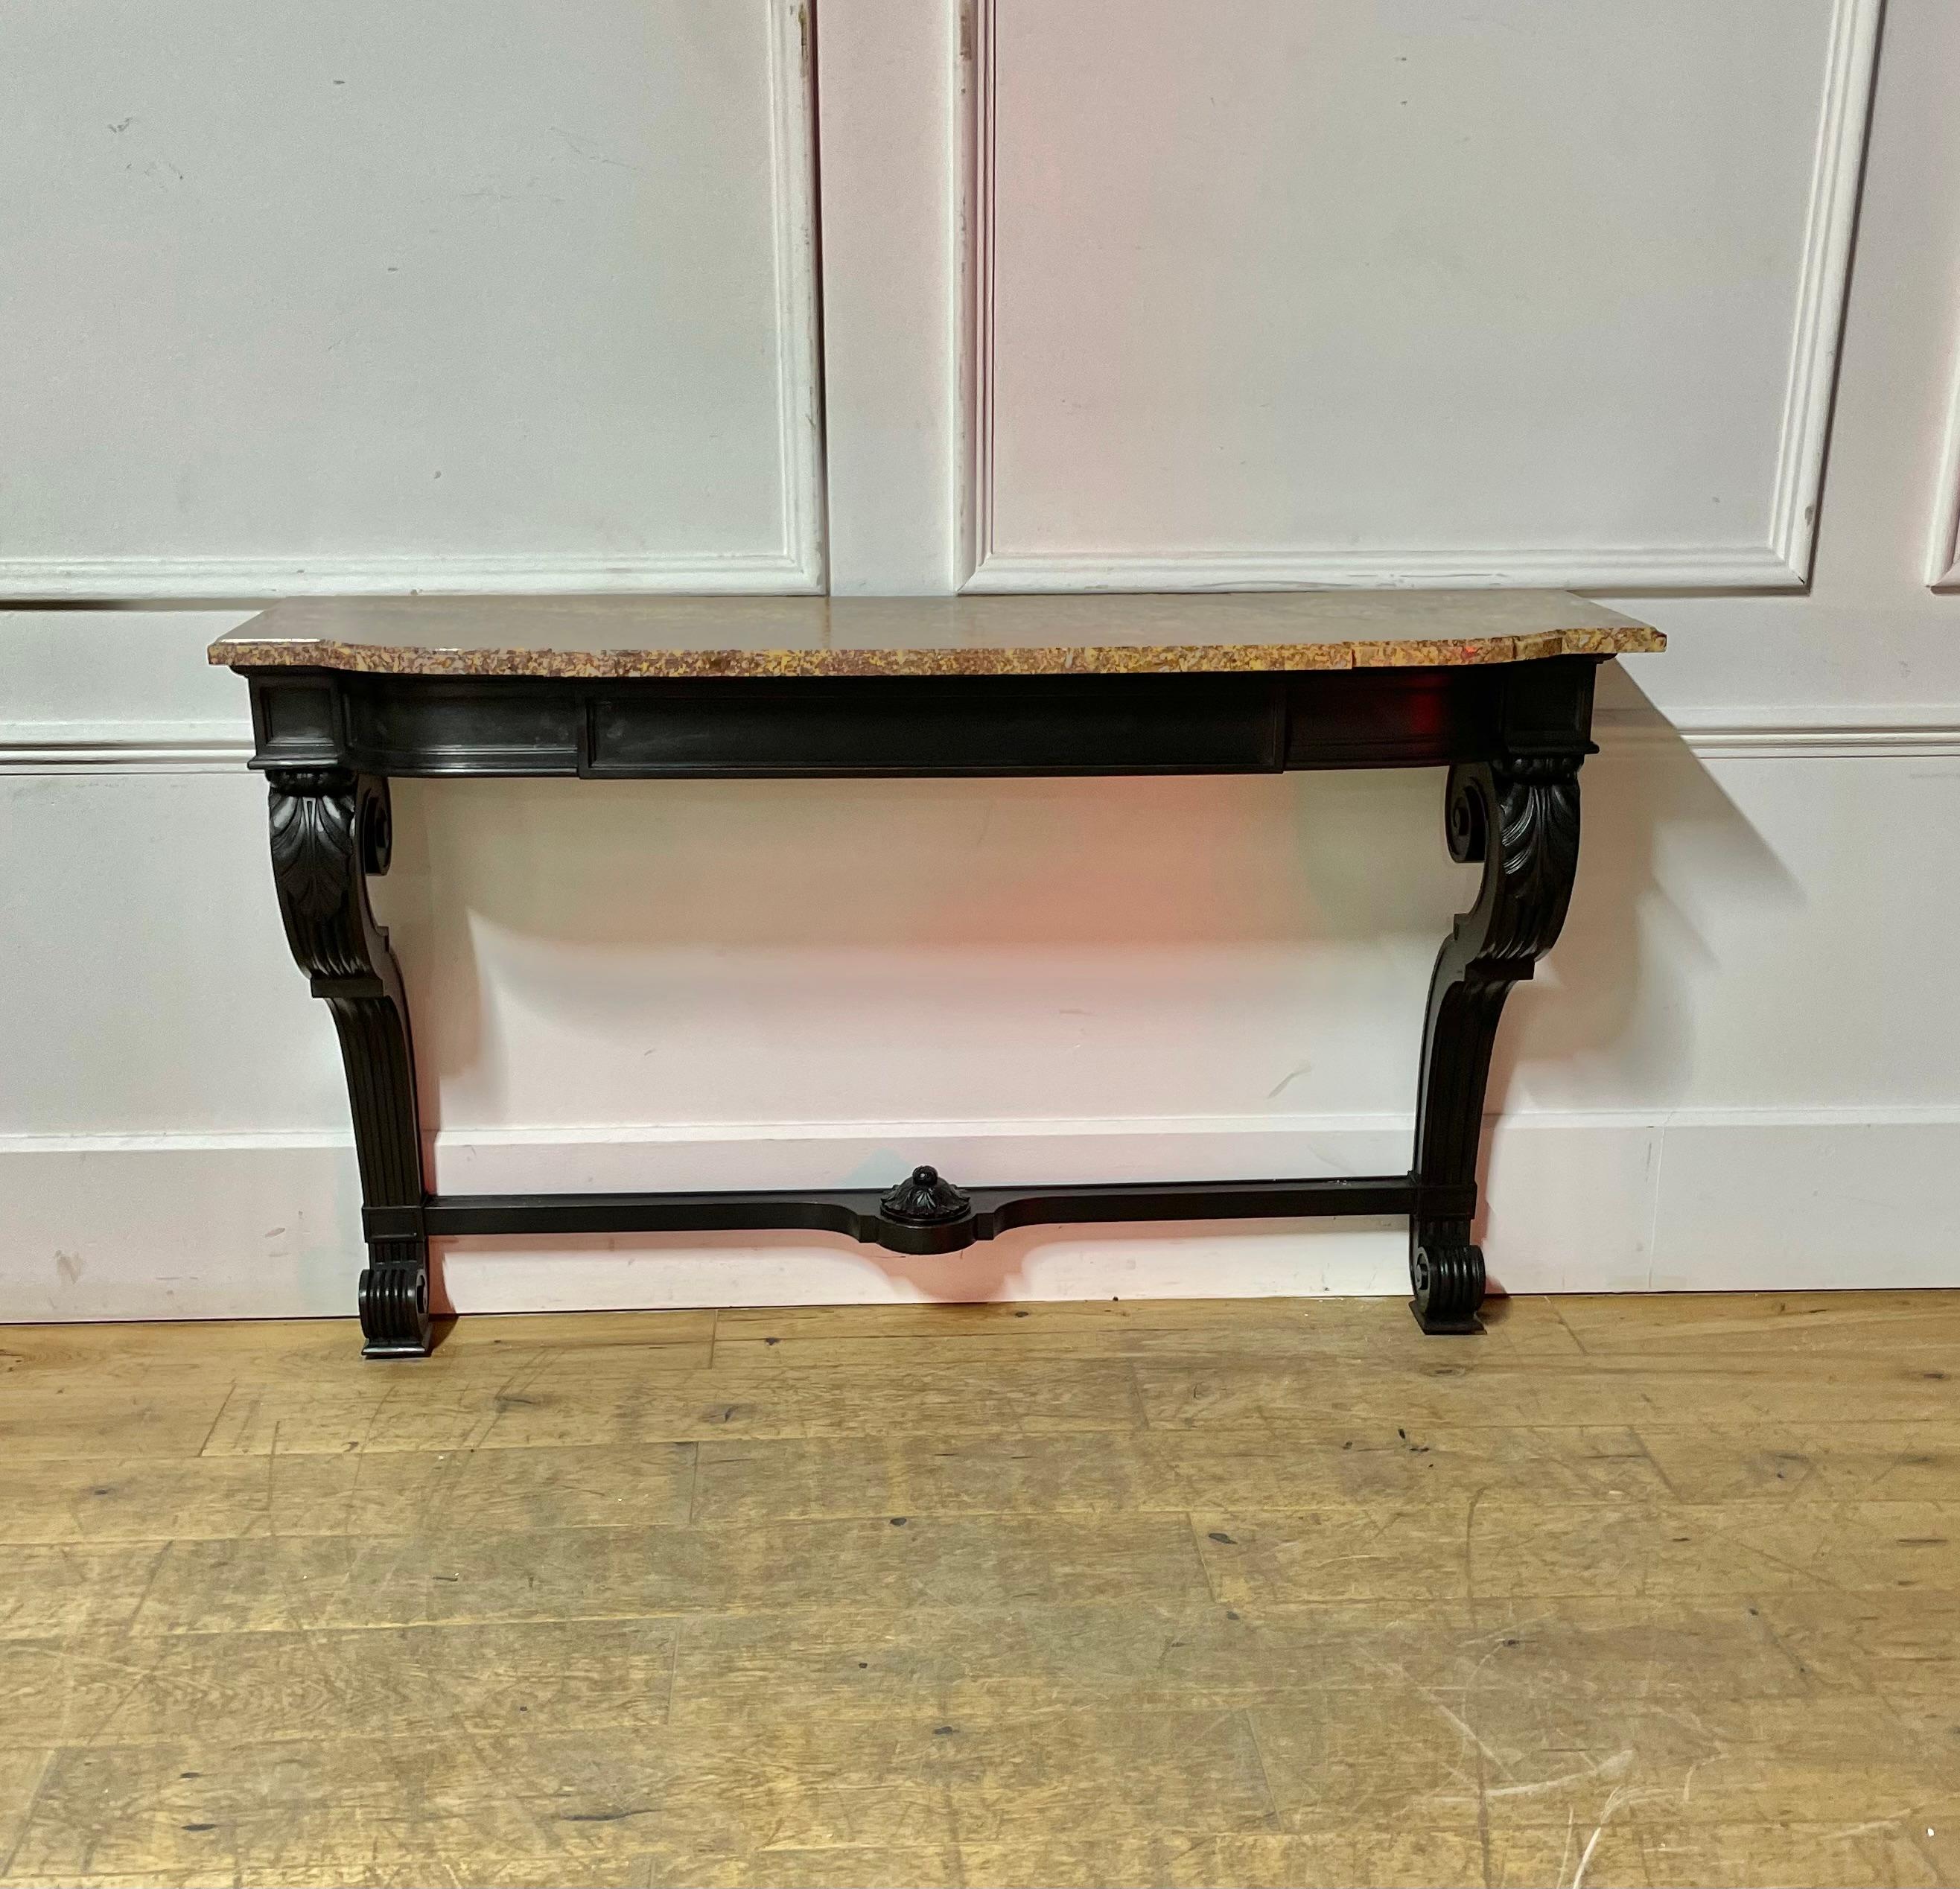 19th century very stylish painted mahogany and marble topped console table.
French circa 1860’s from the Napoleon III period.
Single drawer , black paint finish which has been waxed and polished.
The marble has historic repairs.
H: 95 cm (37